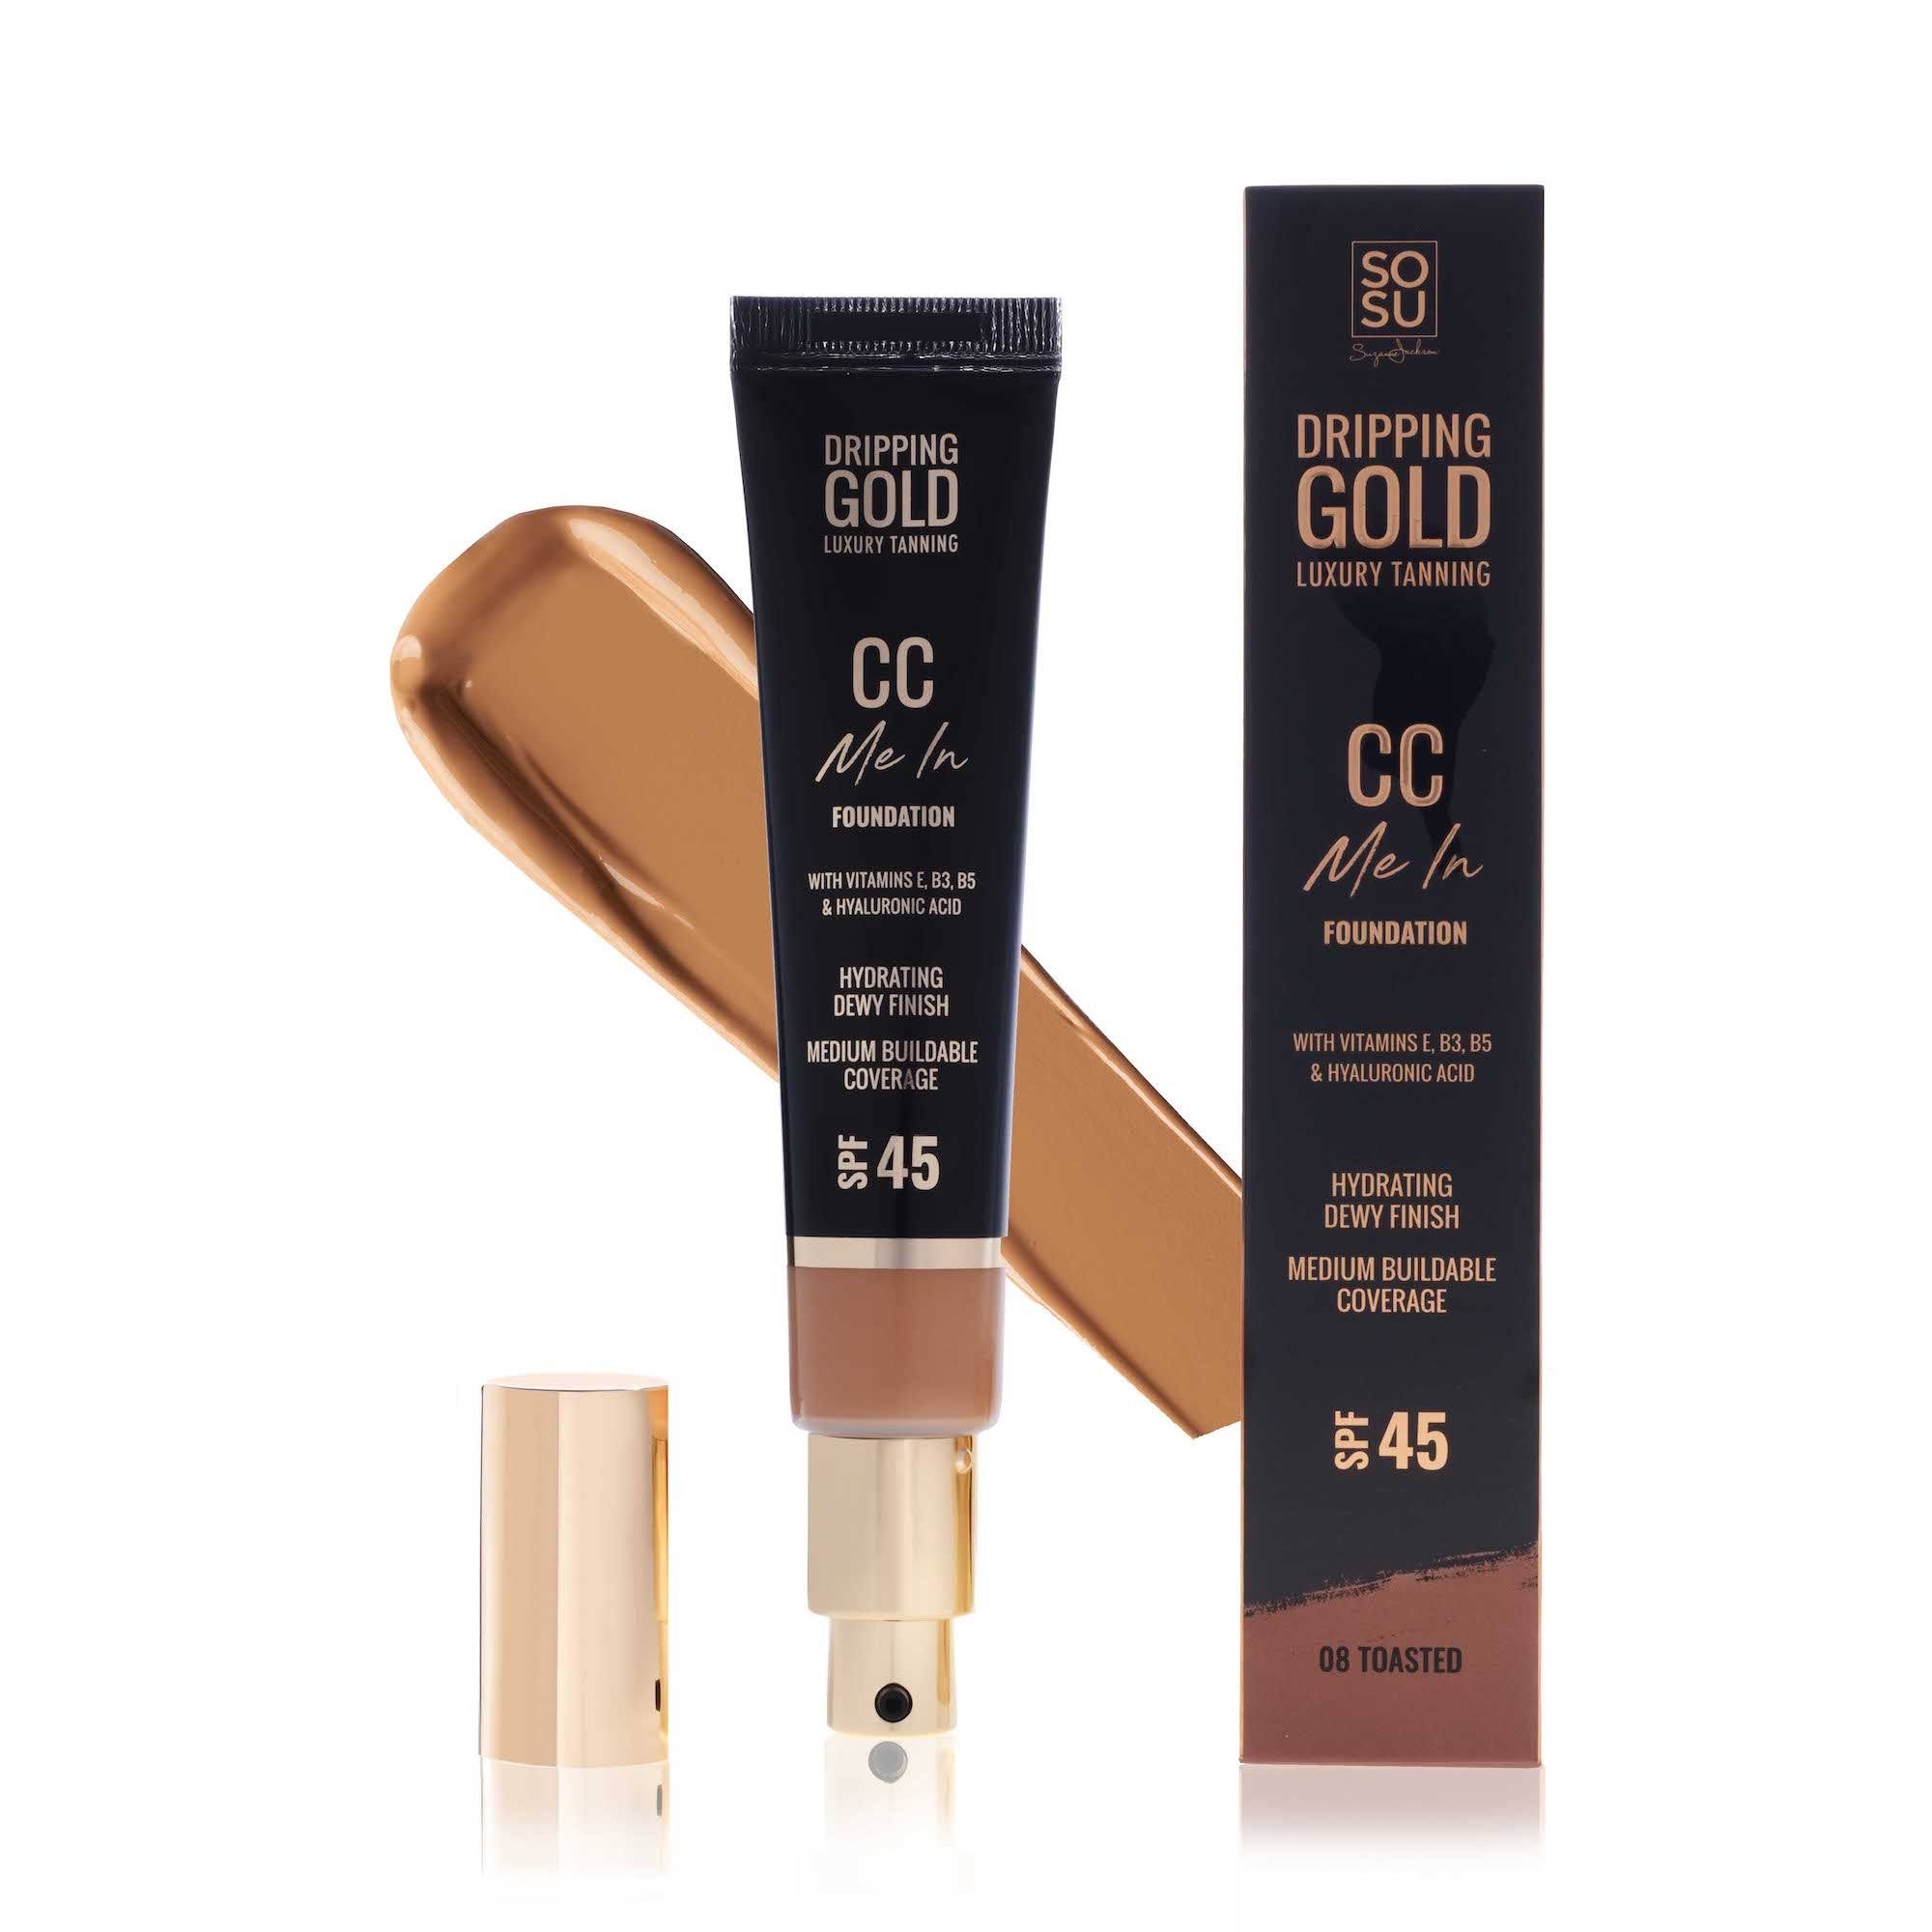 Dripping Gold CC Cream SPF 52g (Various Shades) - Toasted